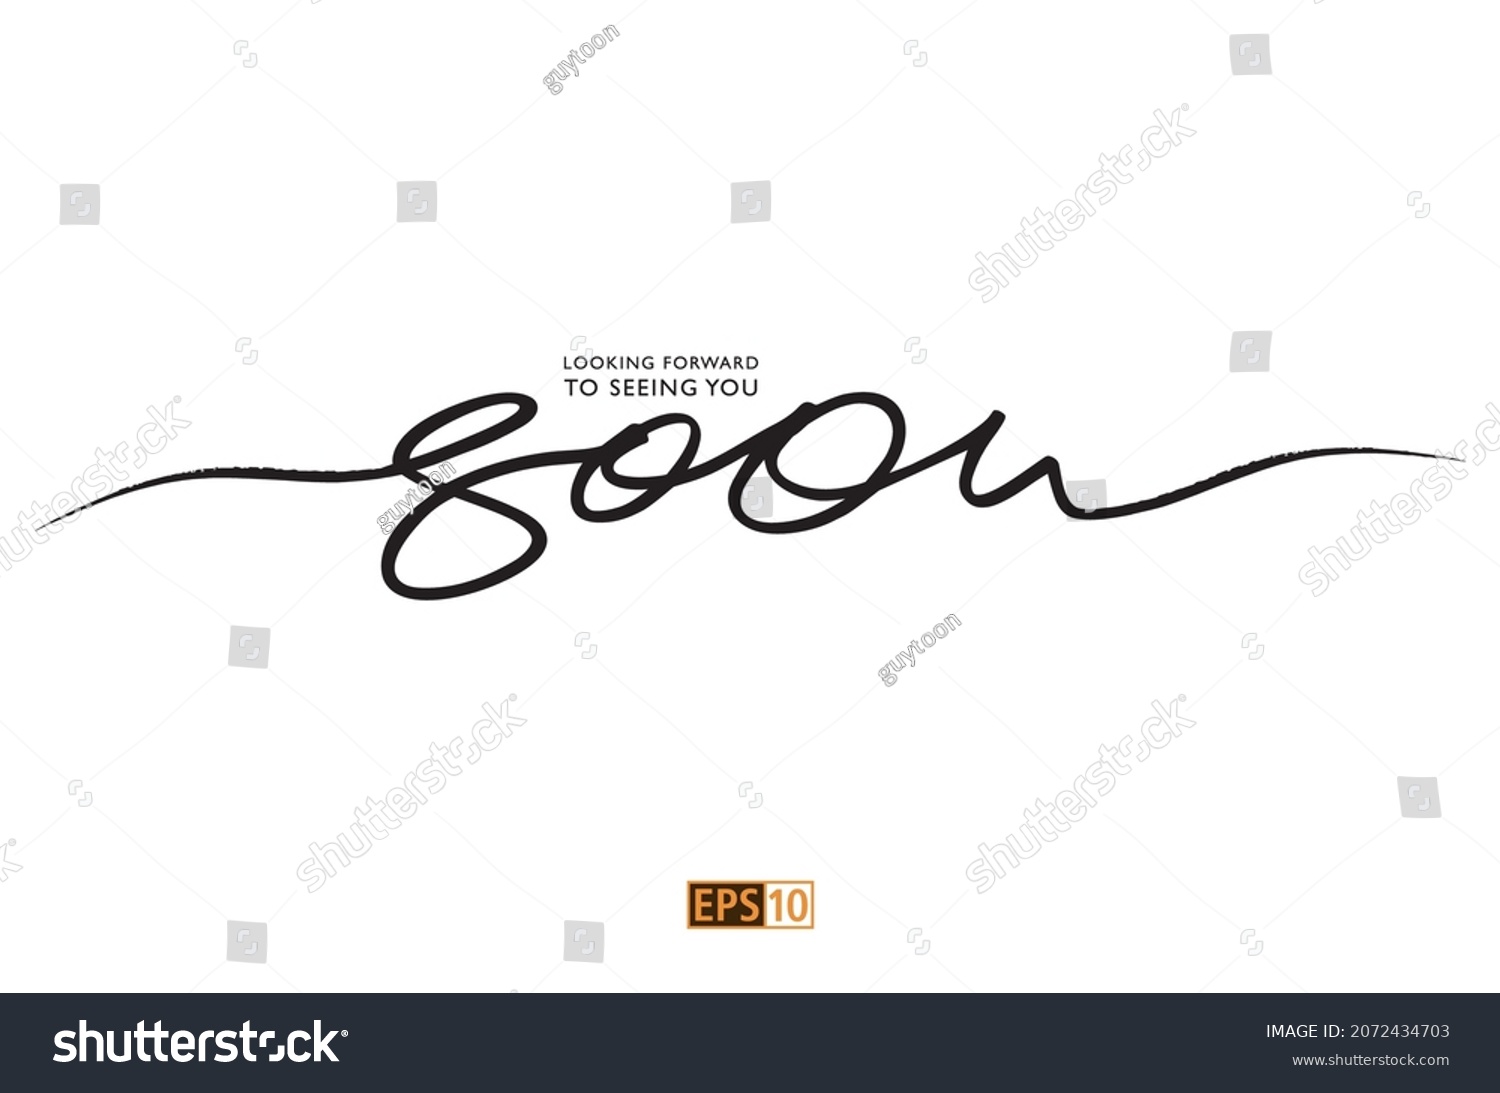 SVG of A greeting or postcard message reading 'Looking forward to seeing you soon' as hand drawn script svg